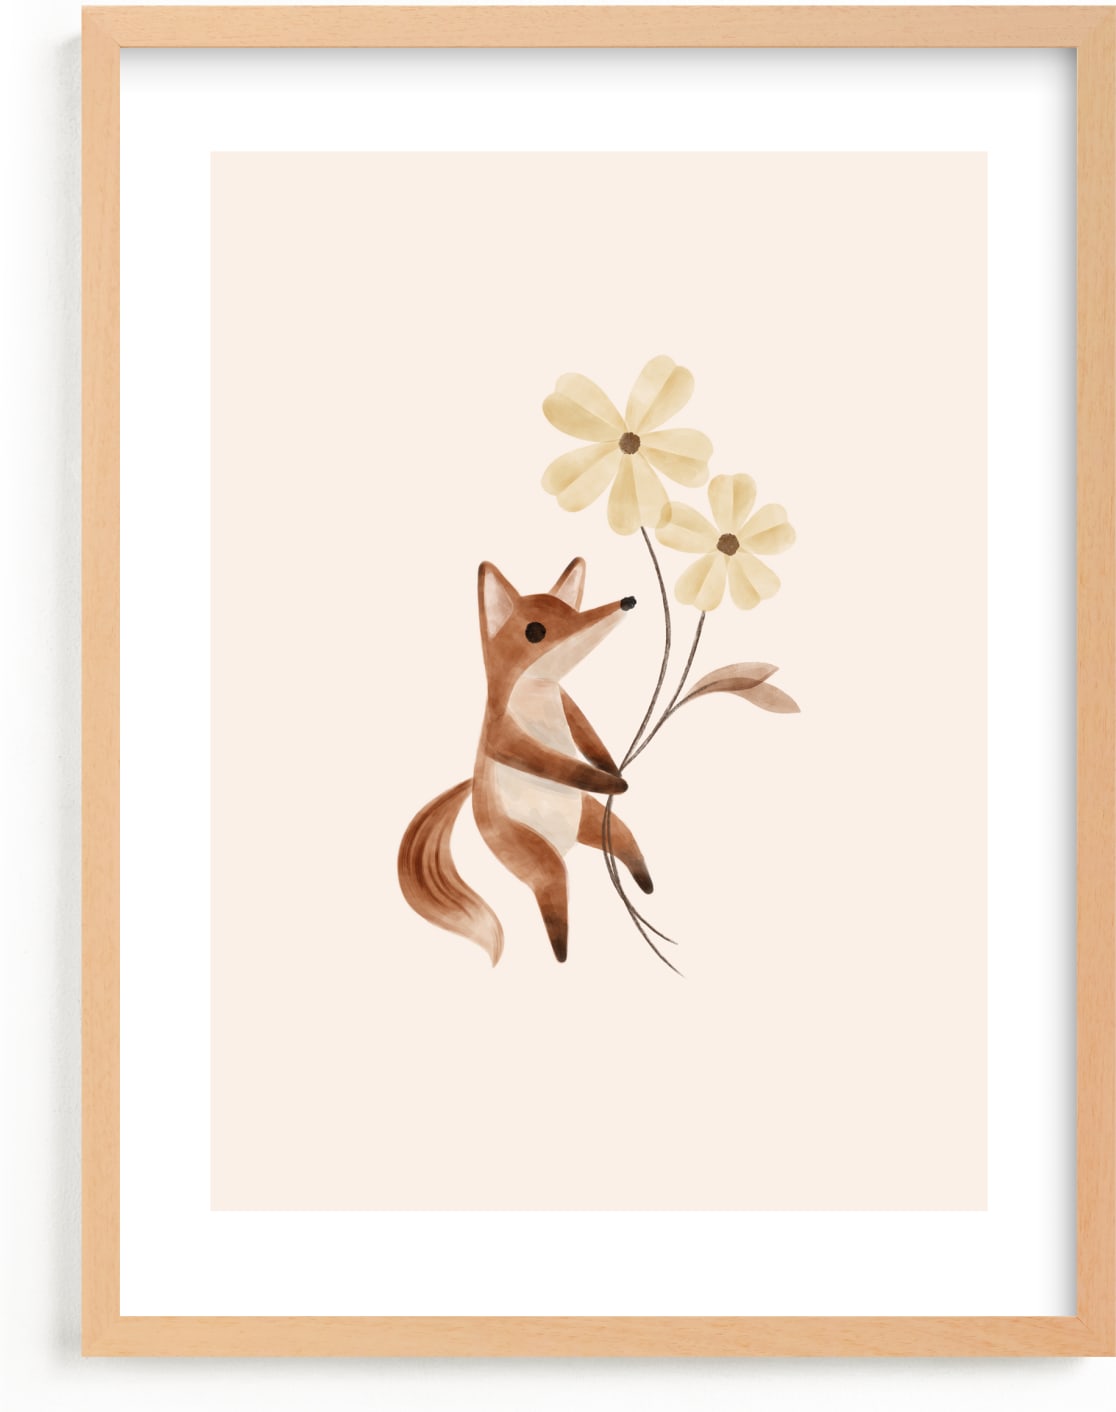 This is a brown art by Vivian Yiwing called fox with flowers.